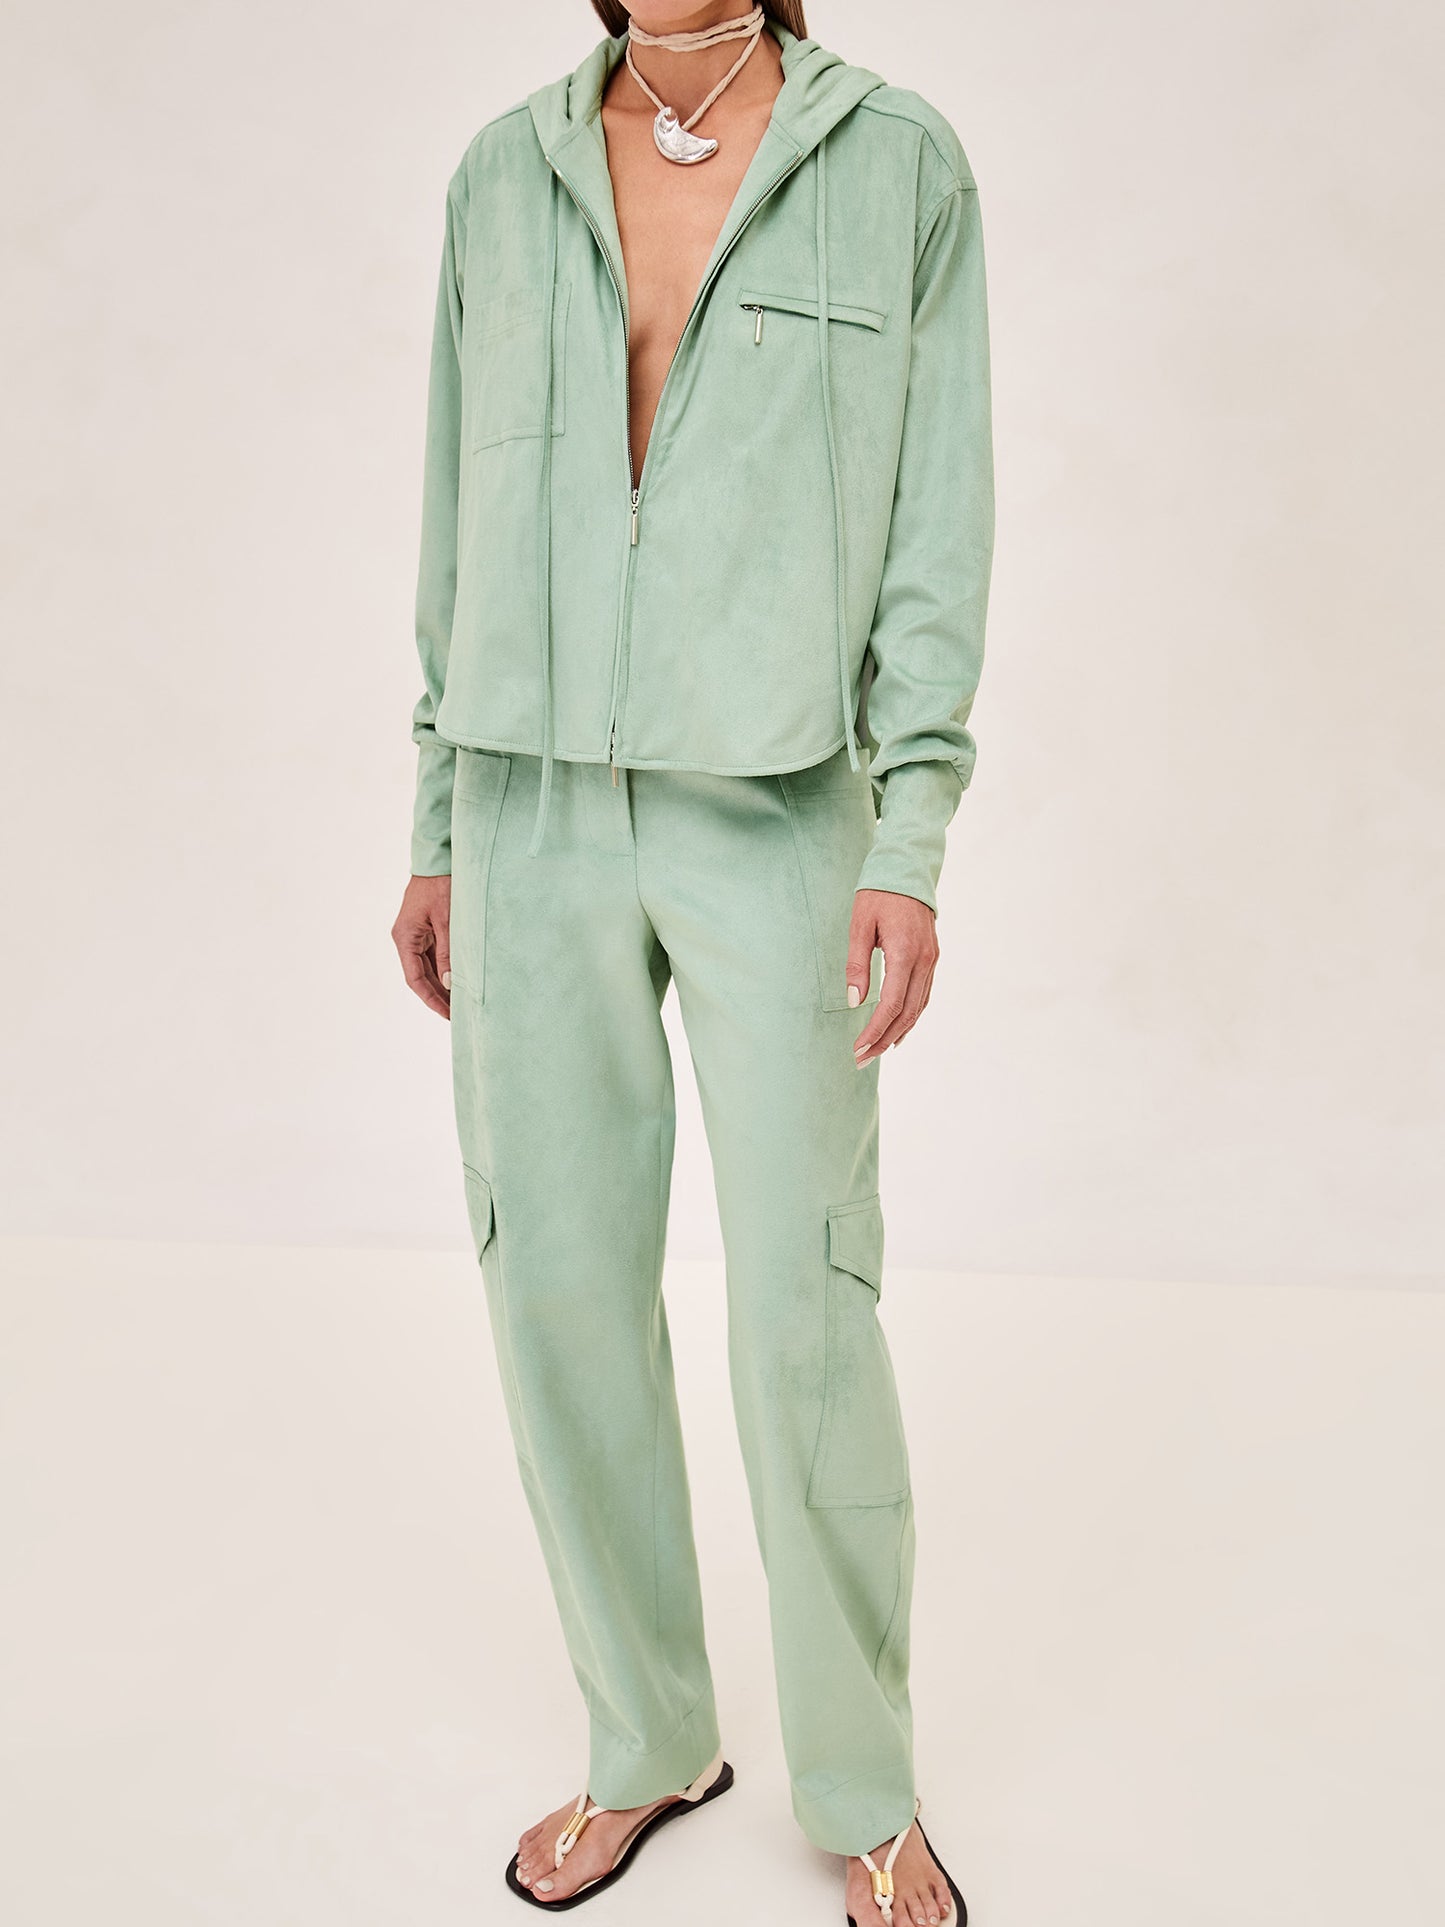 ALEXIS Emilian pants in sage. hover image